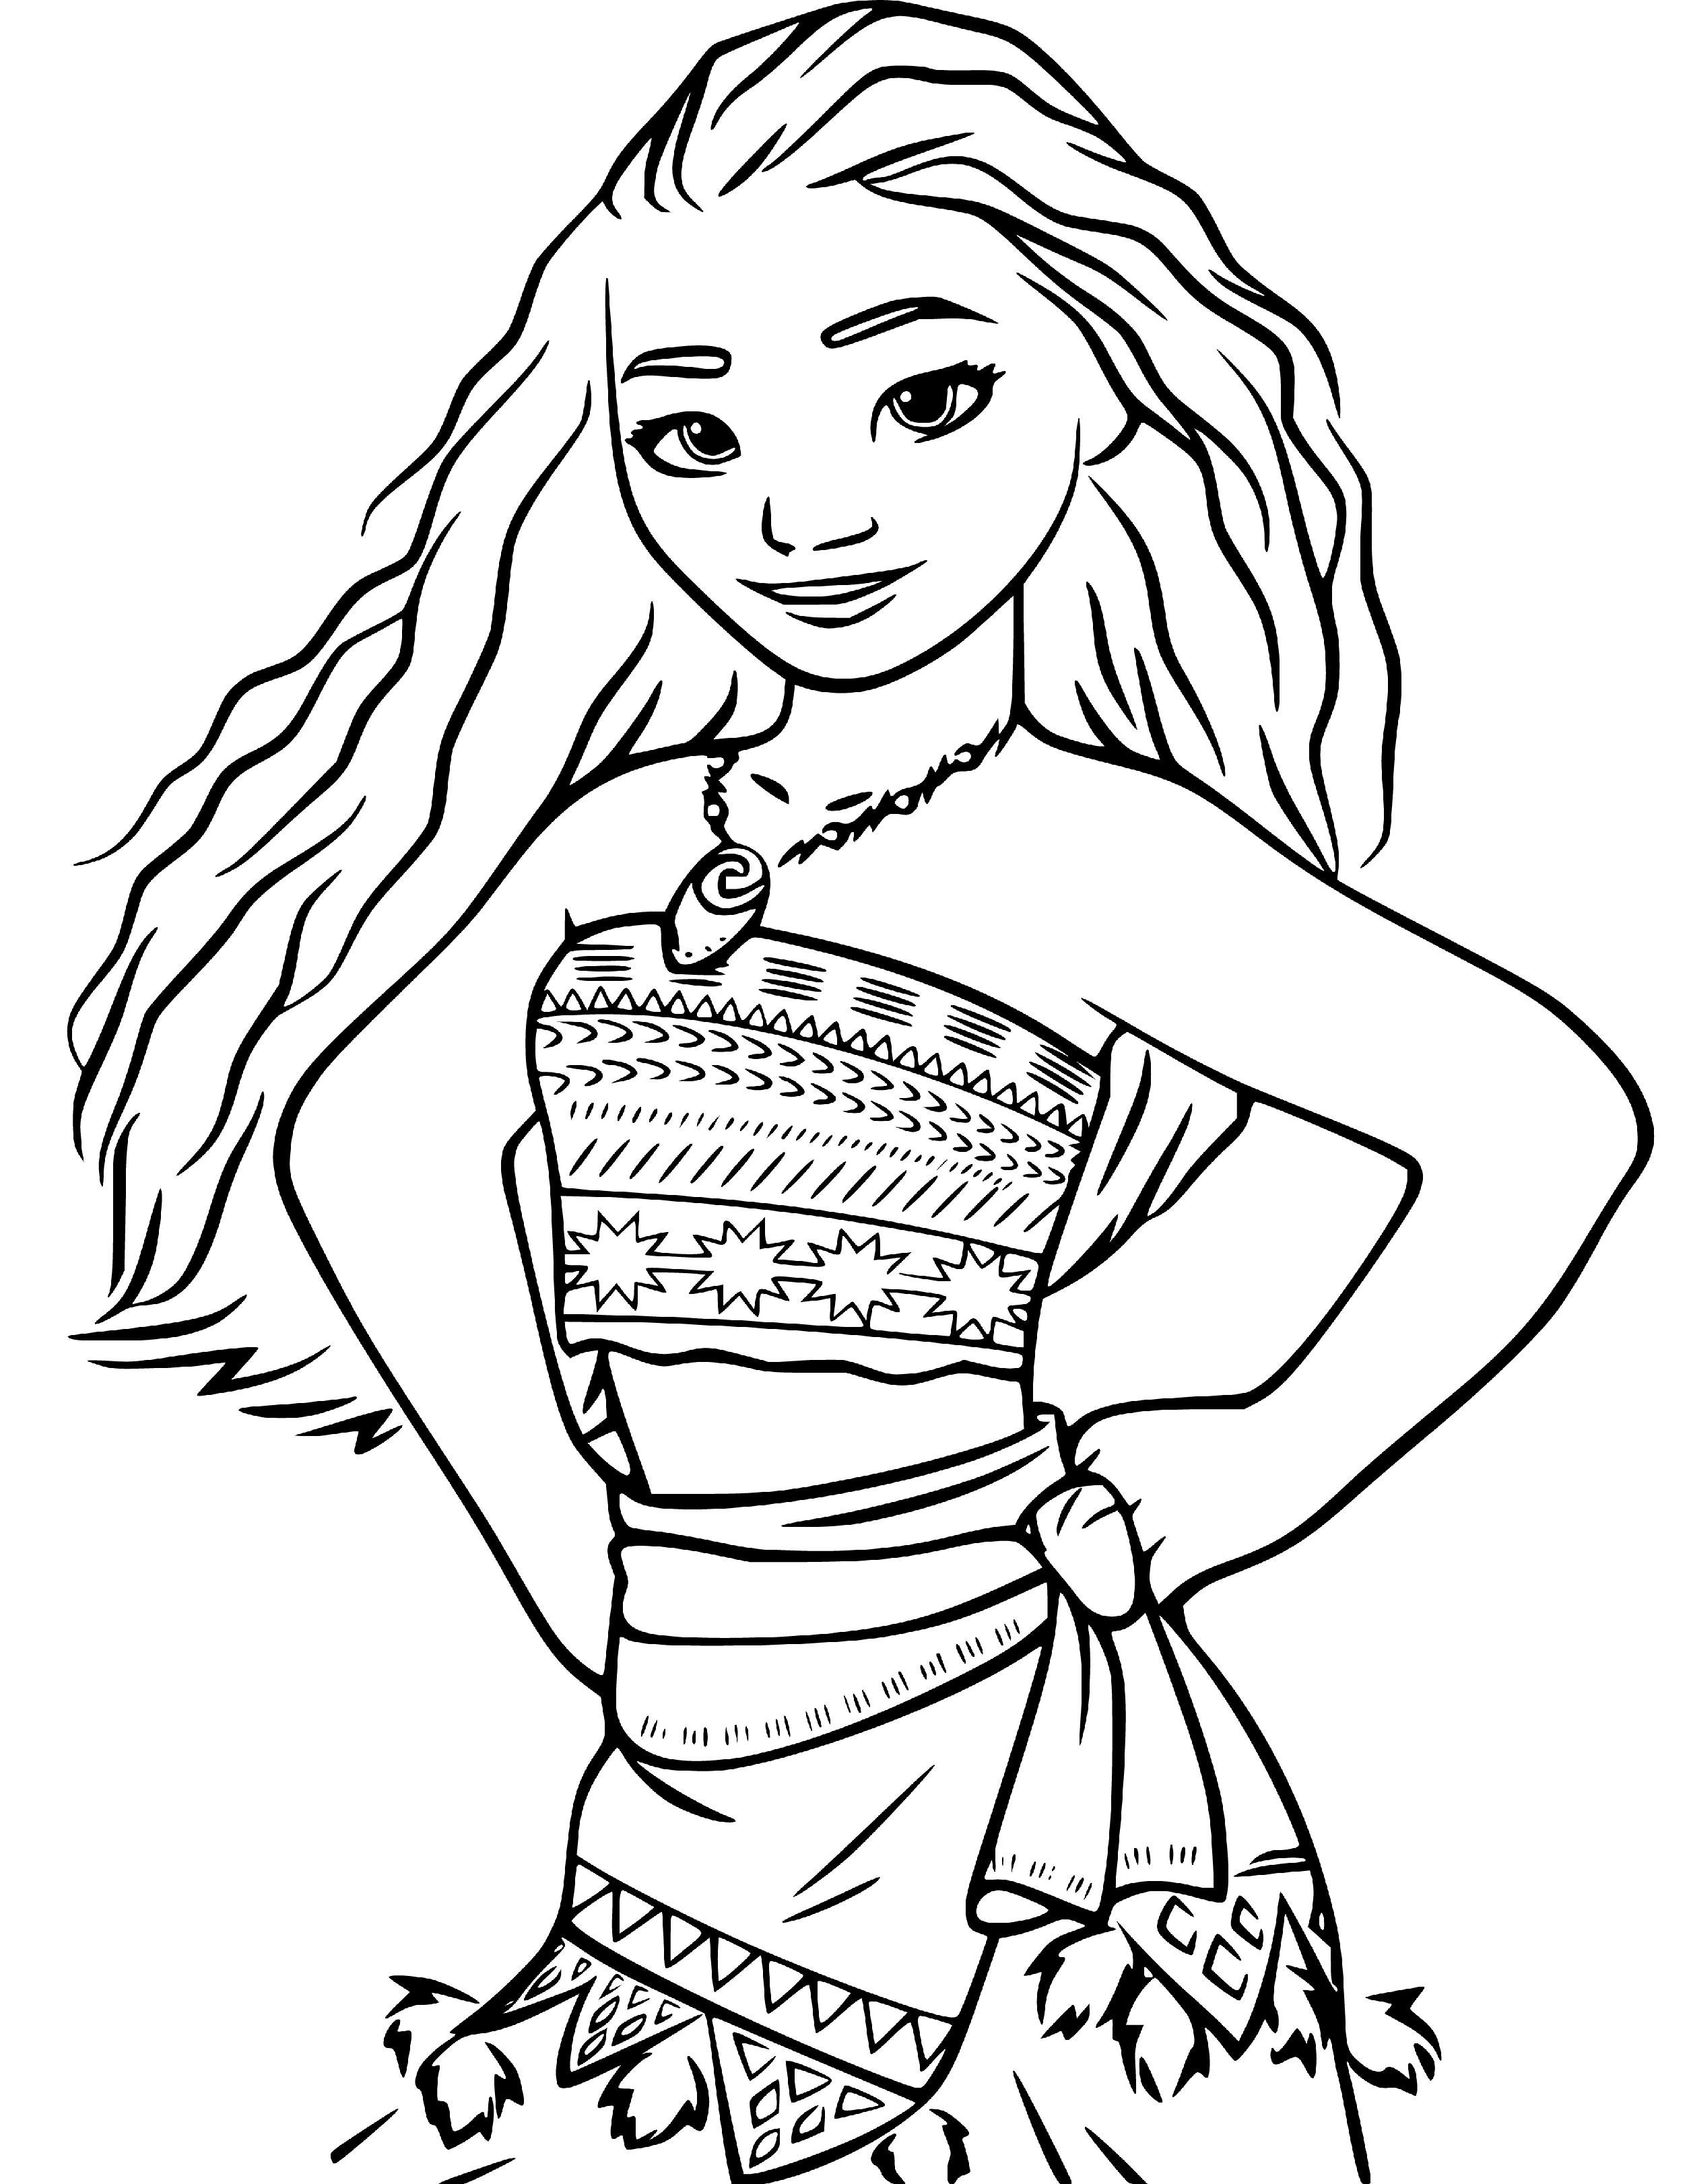 Printable Moana outline Coloring Page for kids.